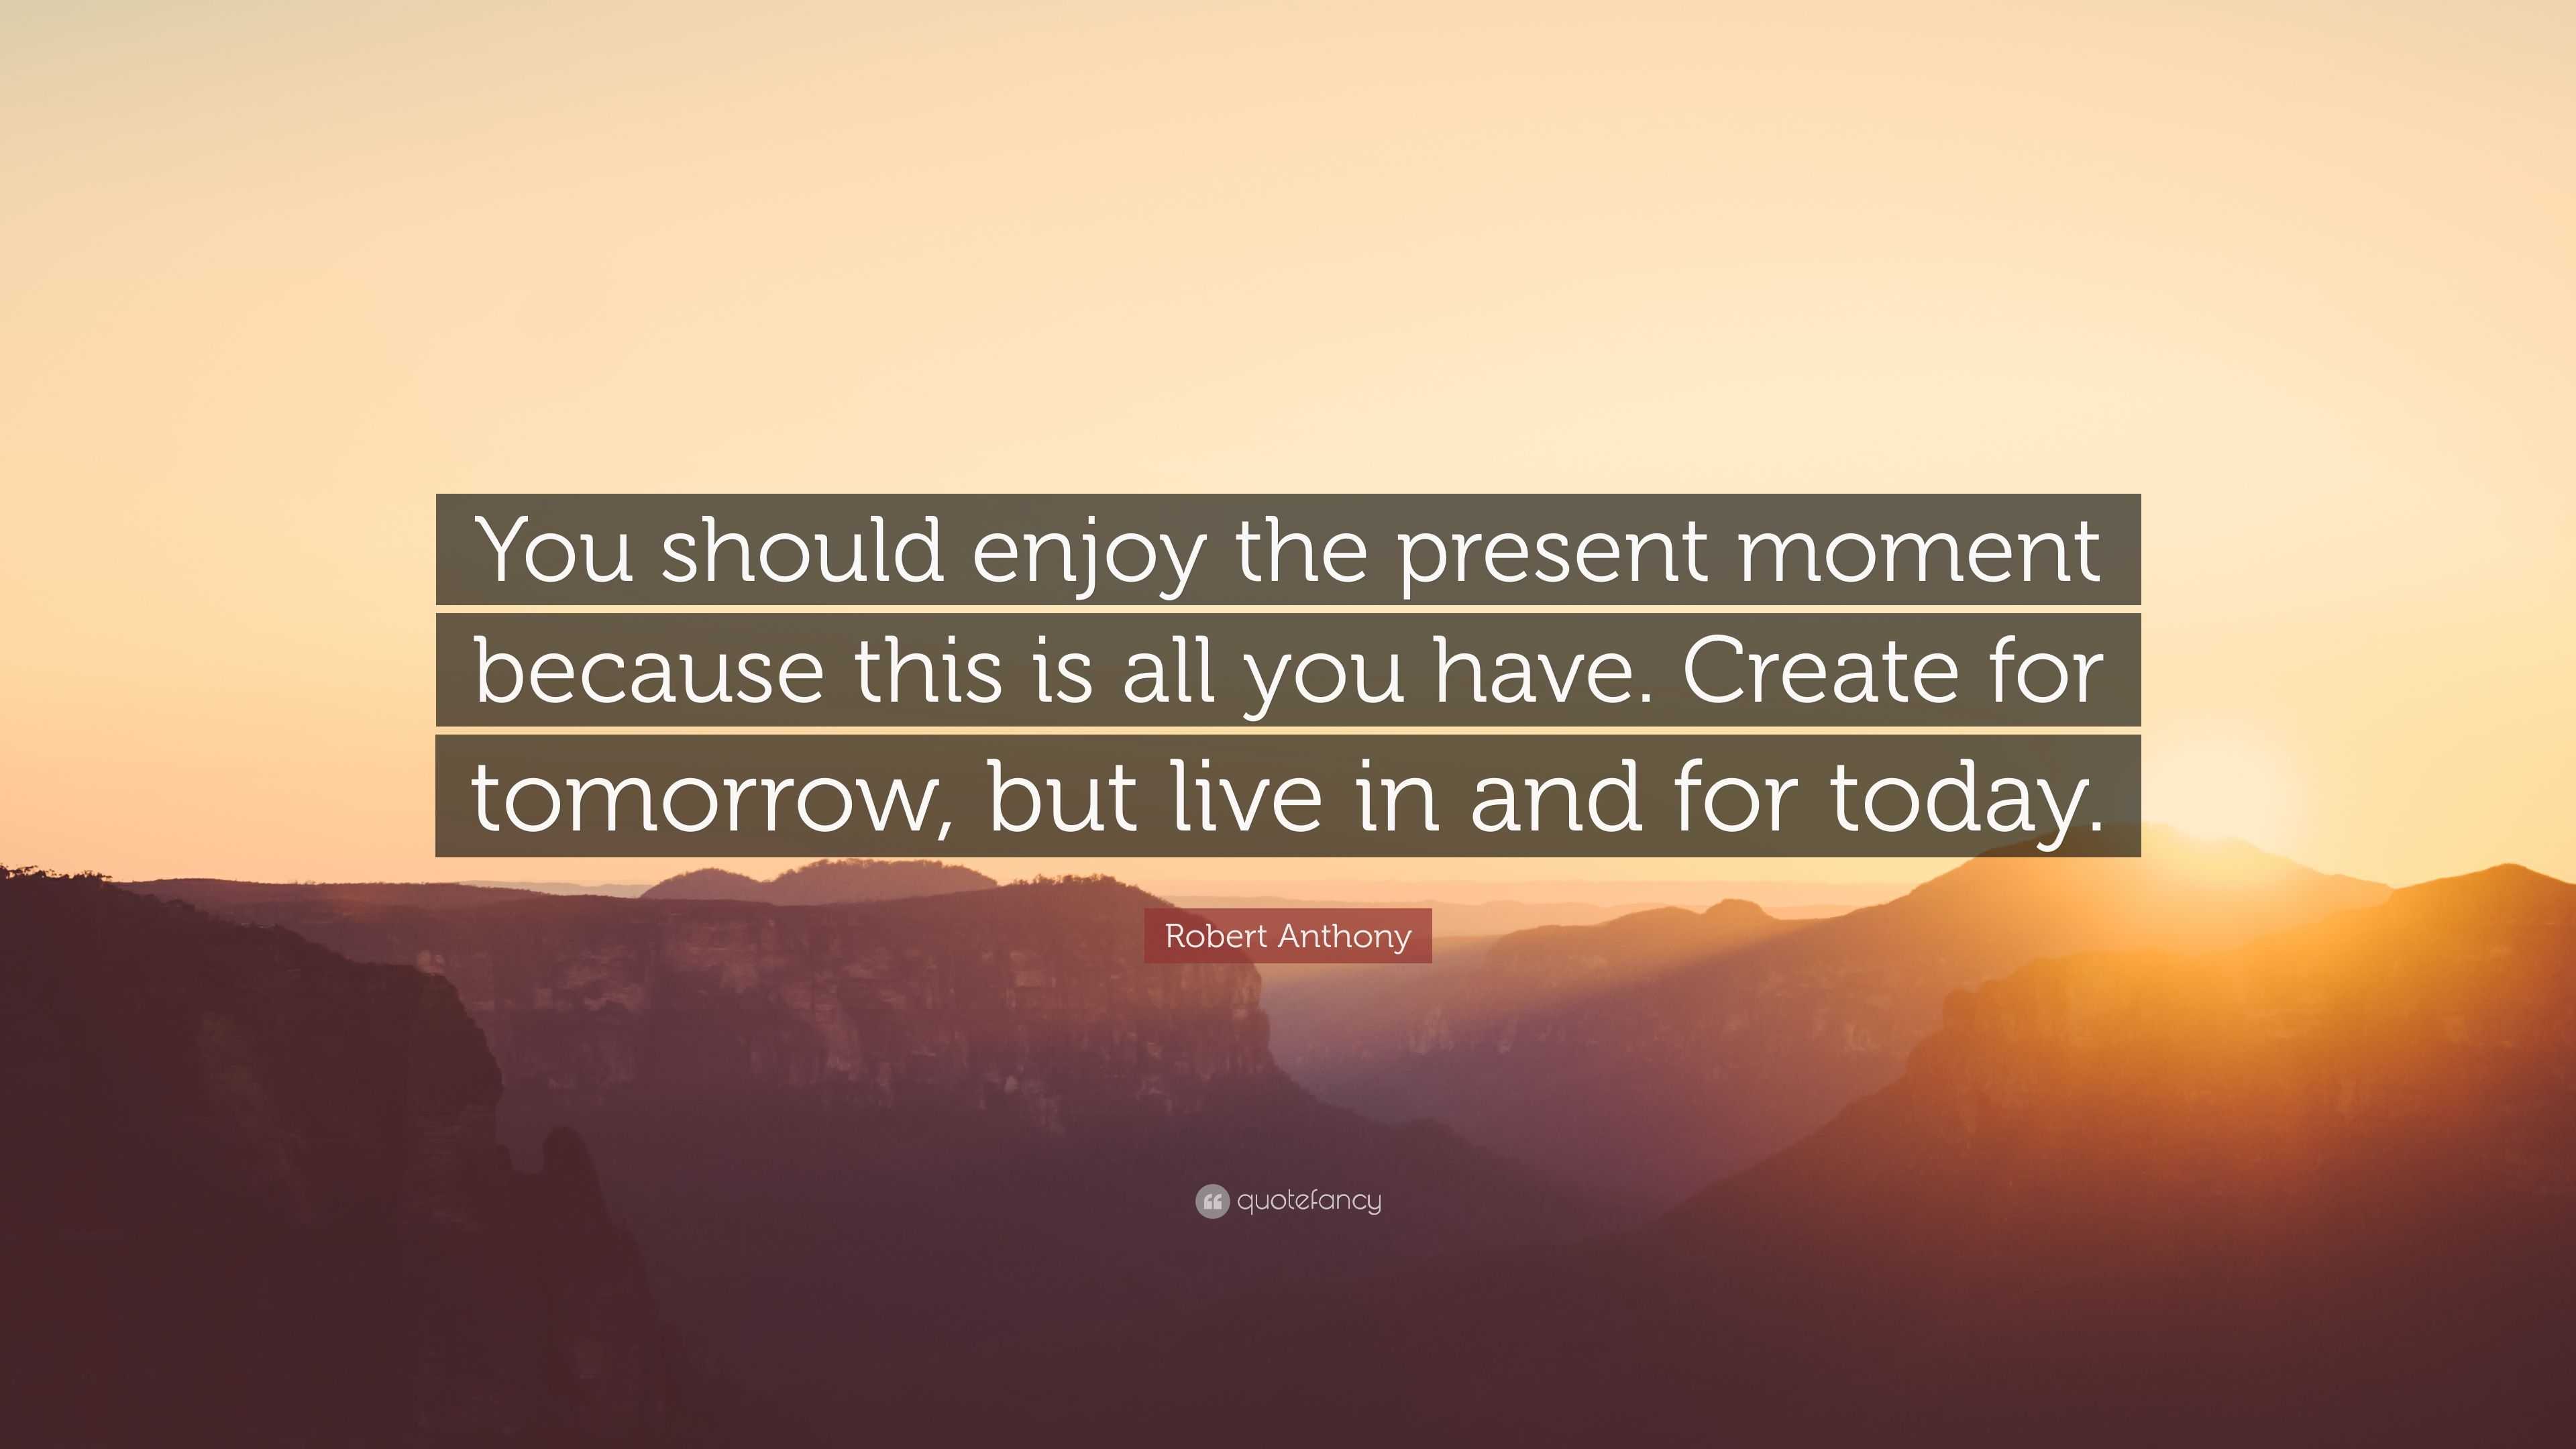 How to Live in the Moment and Enjoy the Present